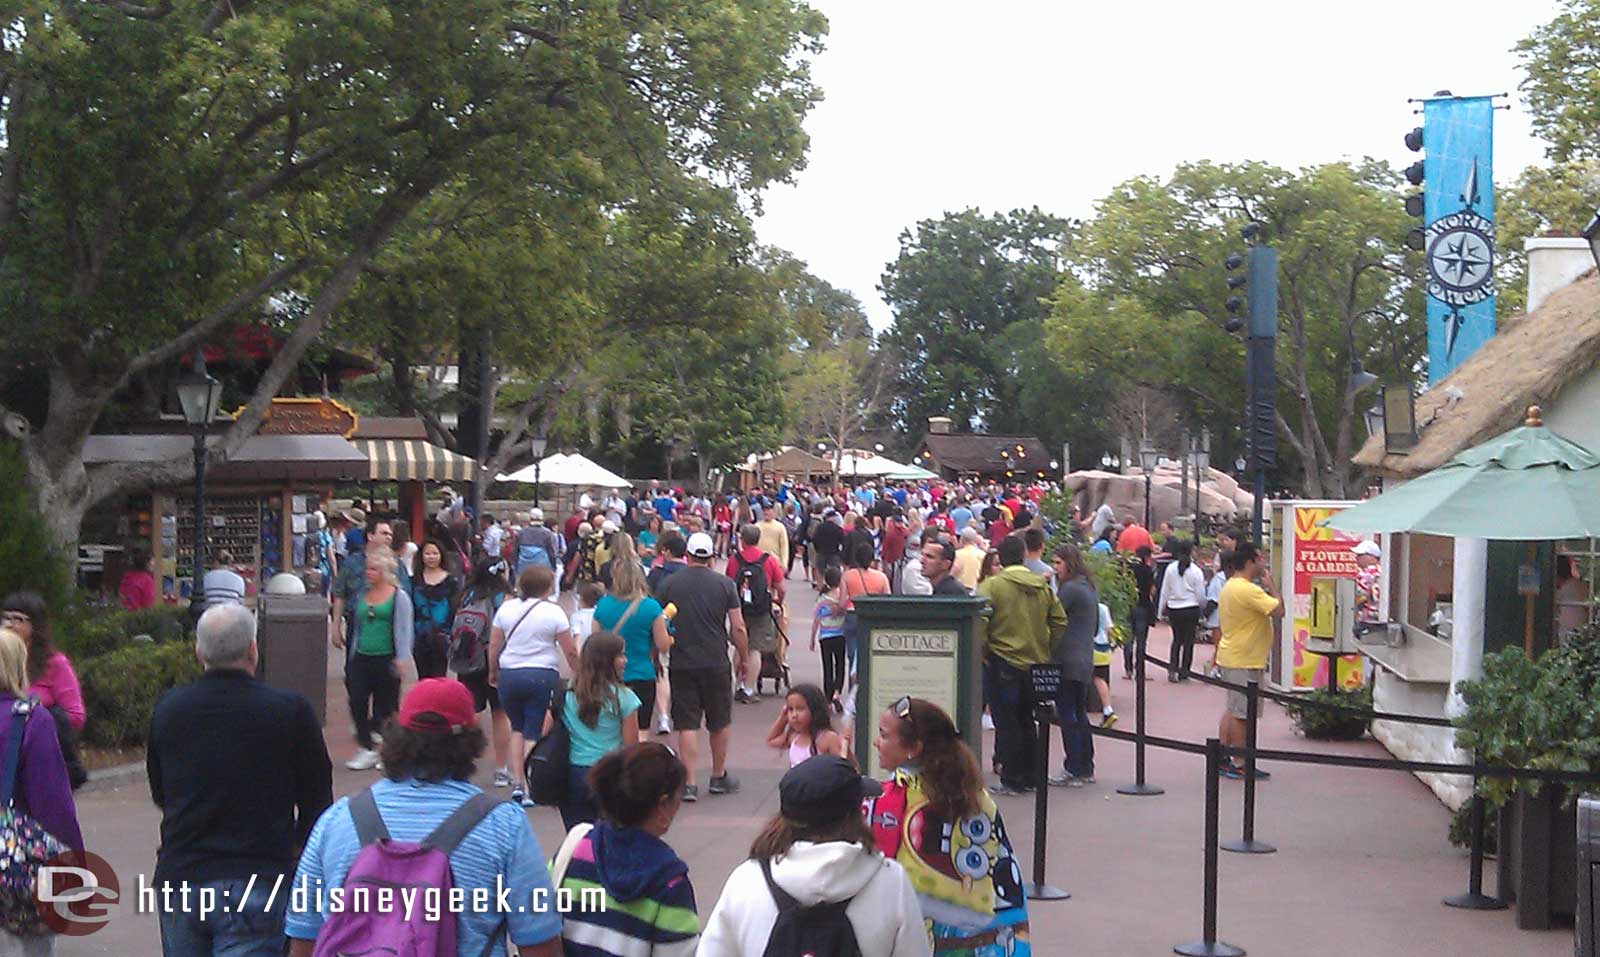 Epcot World Showcase is fairly busy this evening